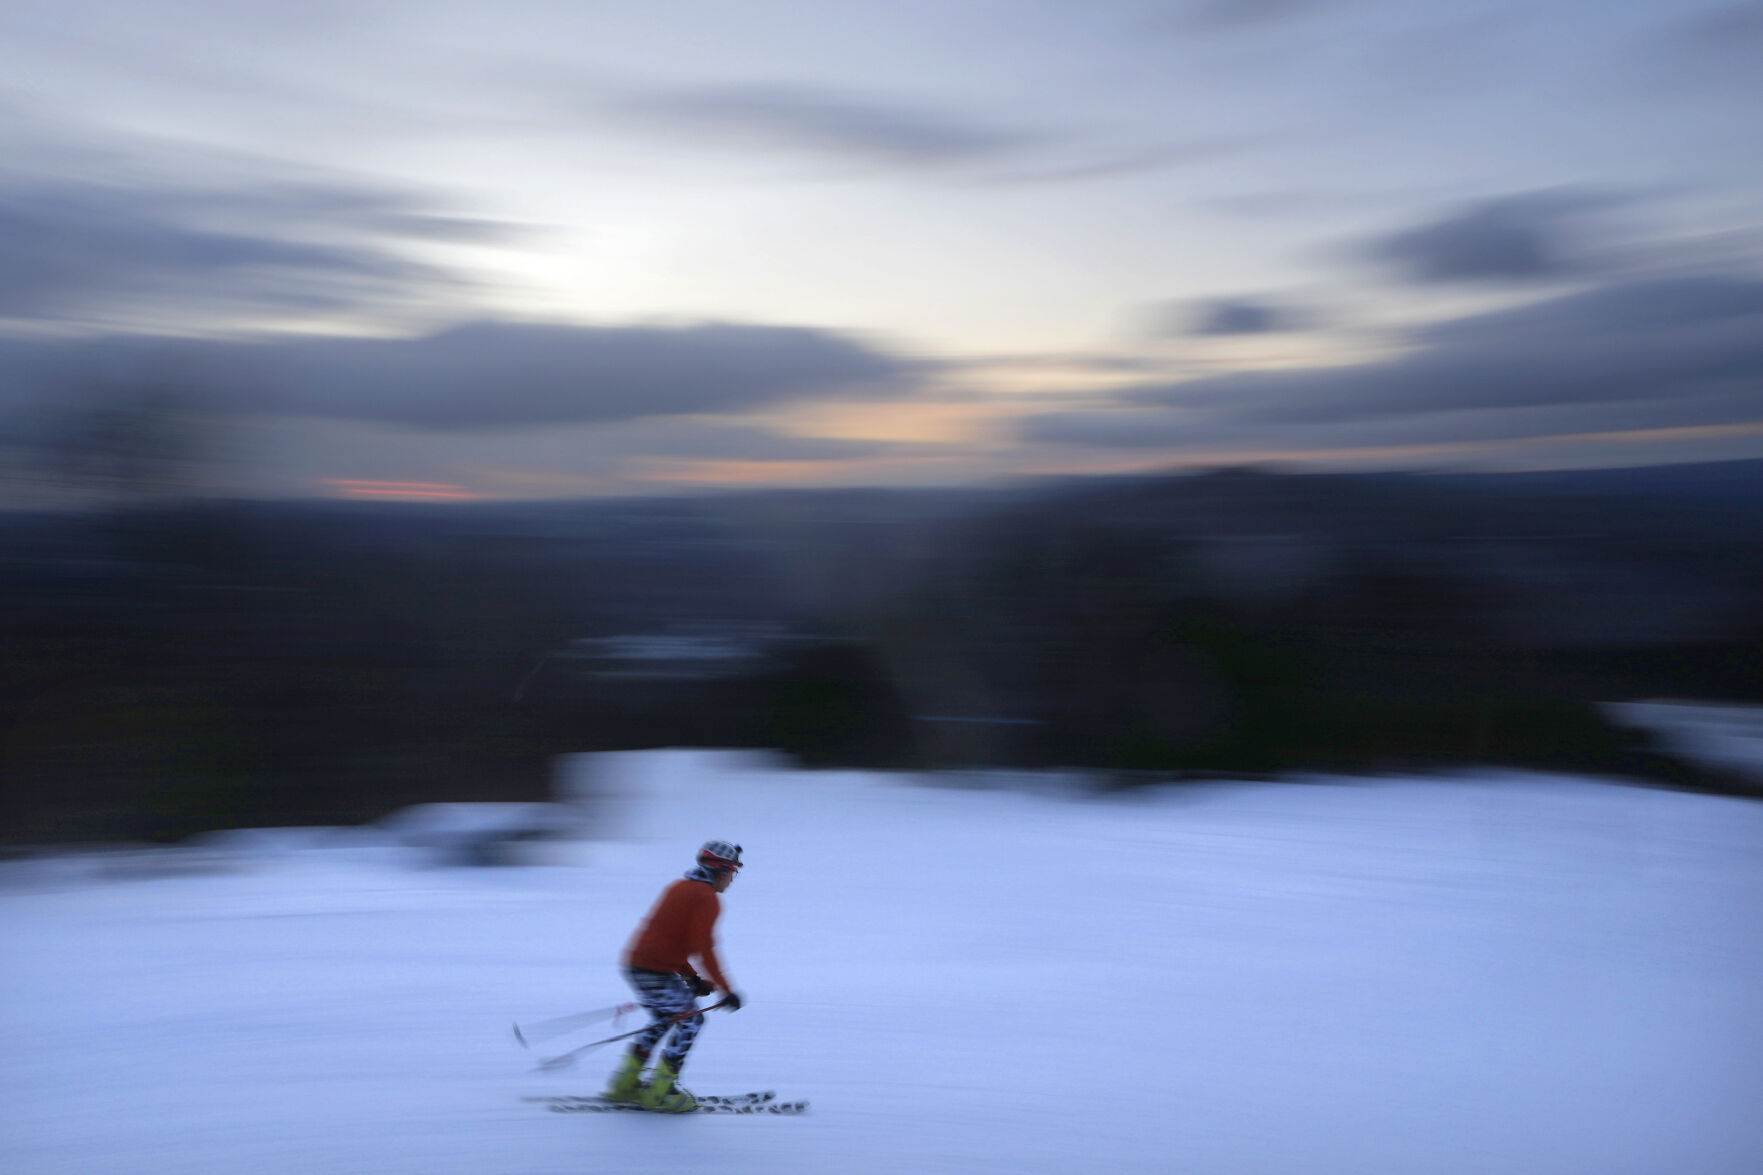 <p>FILE - A skier descends Black Mountain of Maine, Feb. 11, 2023, in Rumford, Maine. A new study says U.S. ski areas lost about $5 billion from 2000 to 2019 as a result of human-caused climate change. (AP Photo/Robert F. Bukaty, File)</p>   PHOTO CREDIT: Robert F. Bukaty